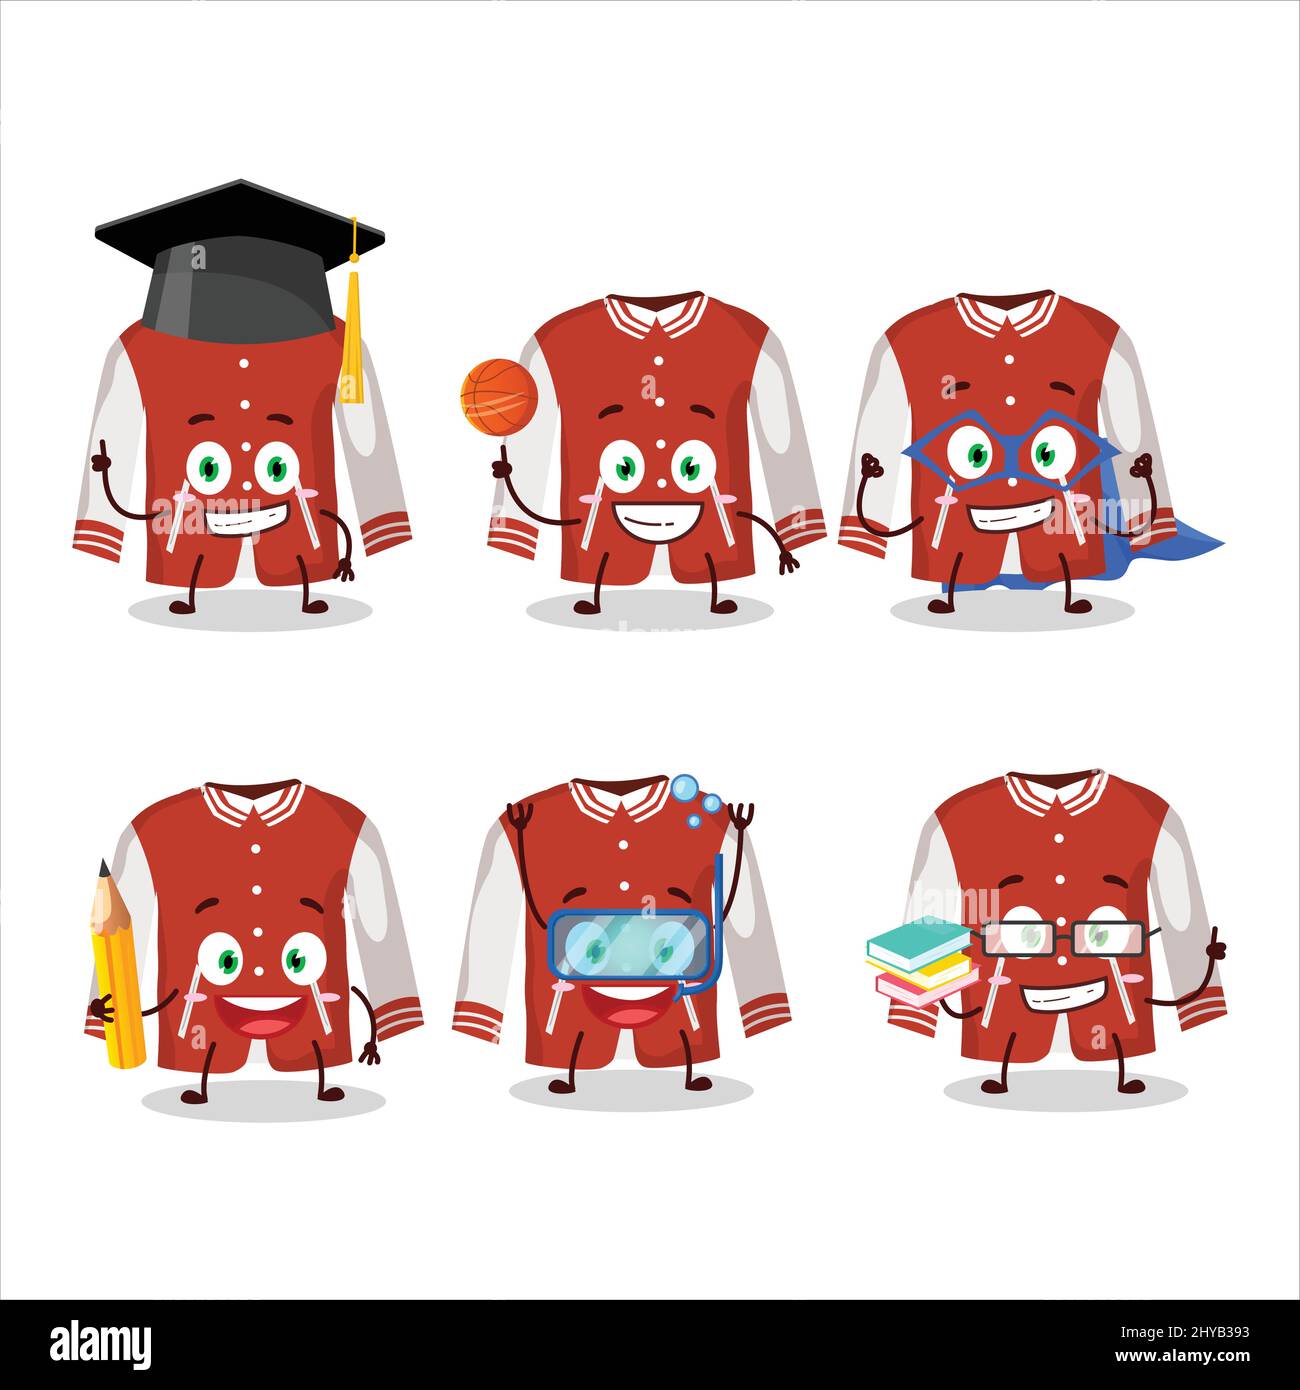 School student of red baseball jacket cartoon character with various expressions. Vector illustration Stock Vector